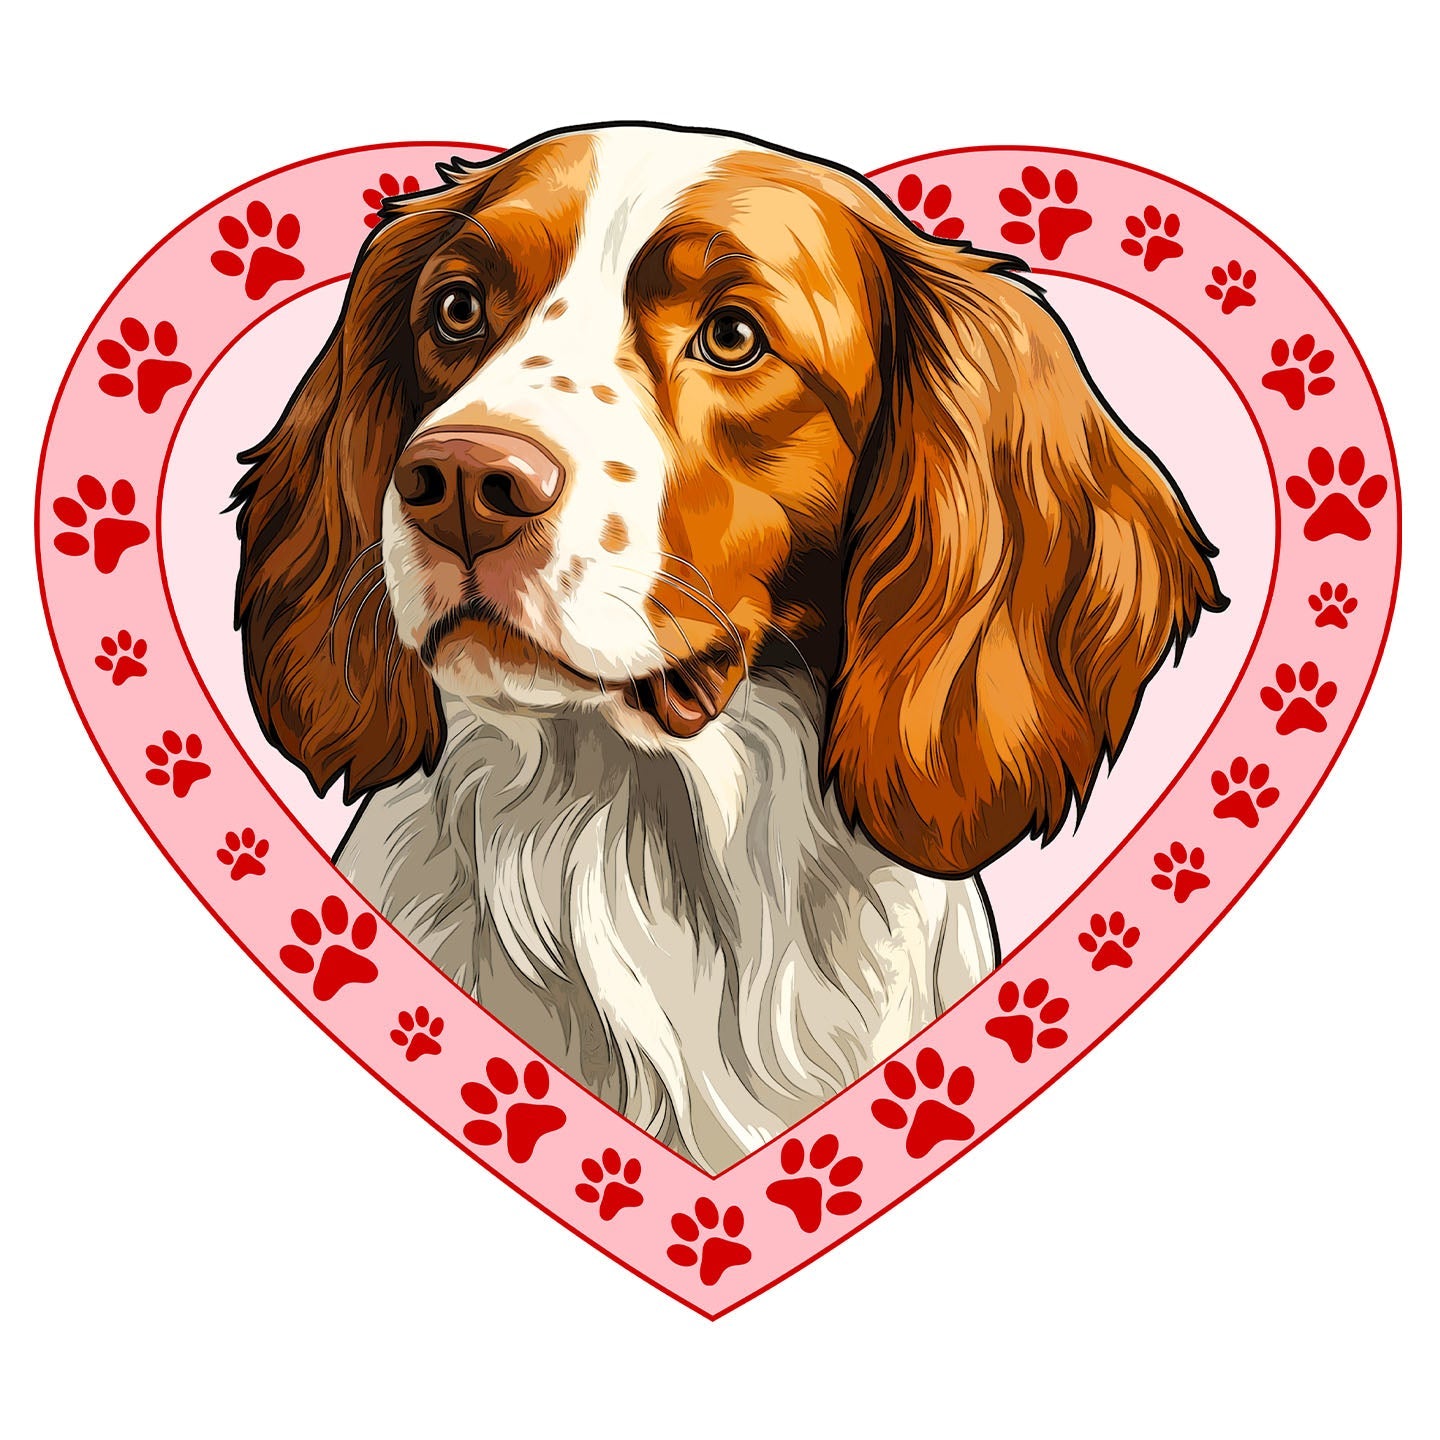 Irish Red and White Setter Illustration In Heart - Adult Unisex T-Shirt